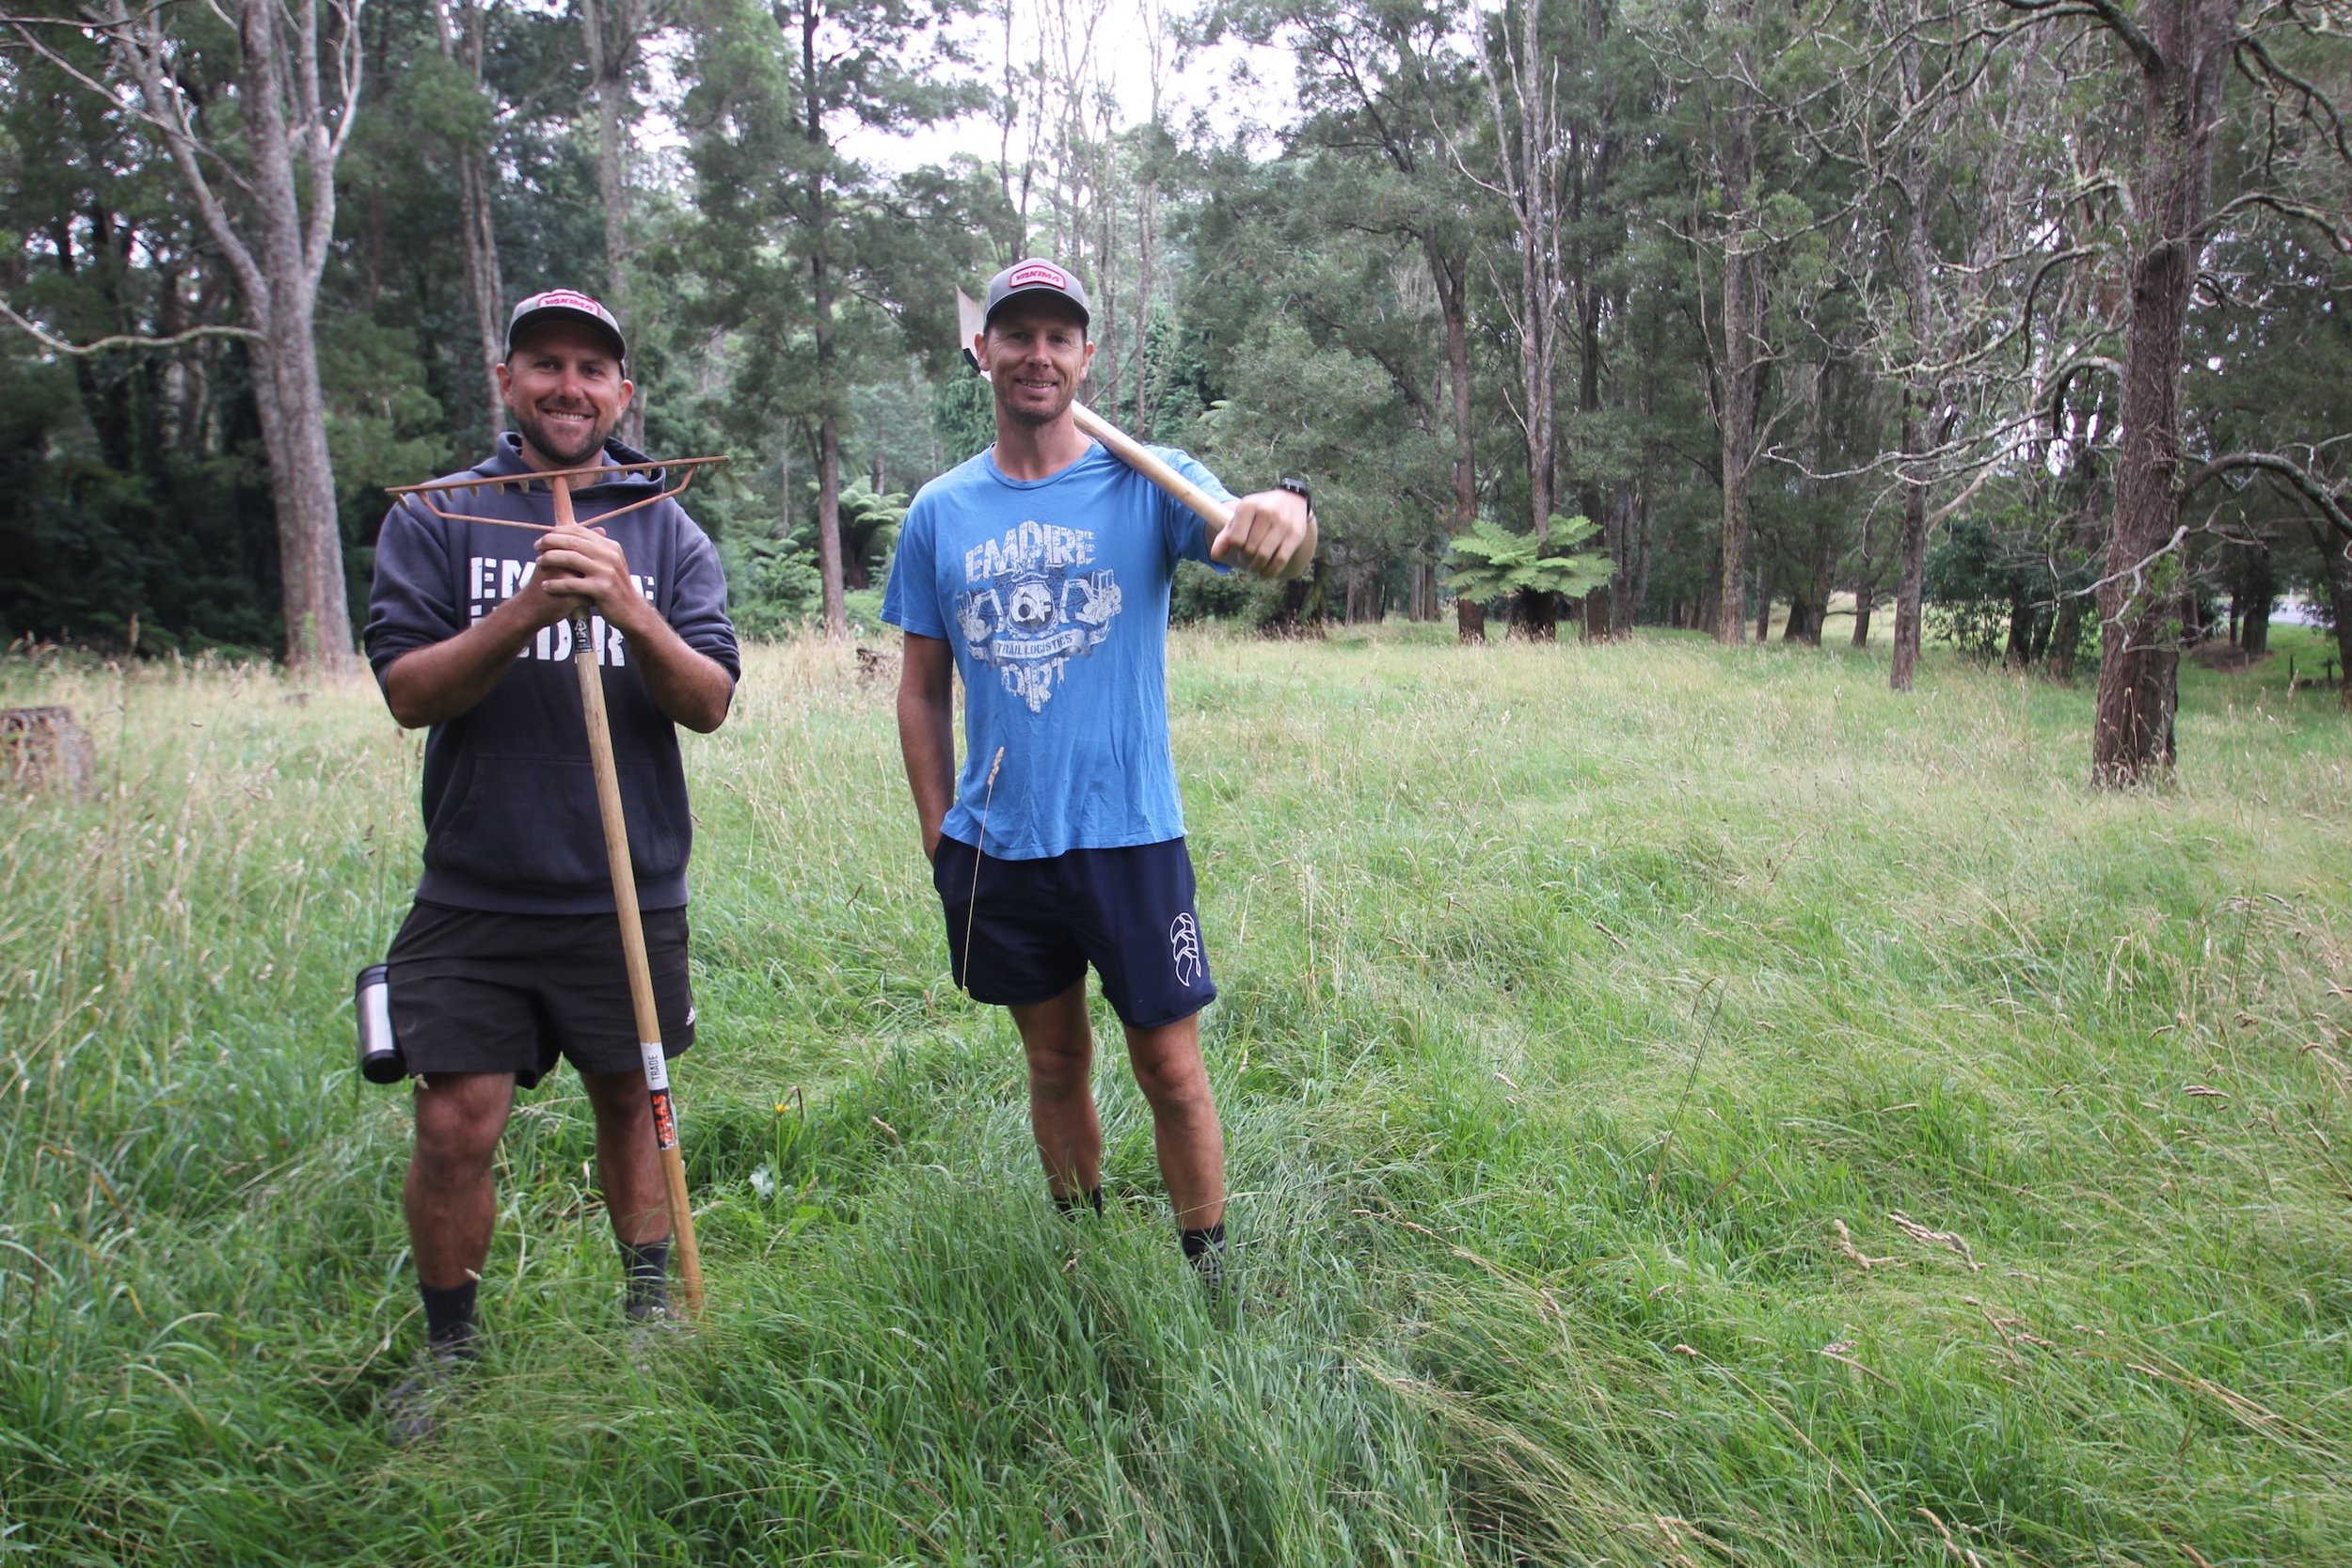 Empire of Dirt trail builders Adam King and Chris Martin will start building the Dual Slalom course in Tokorangi Forest this month.